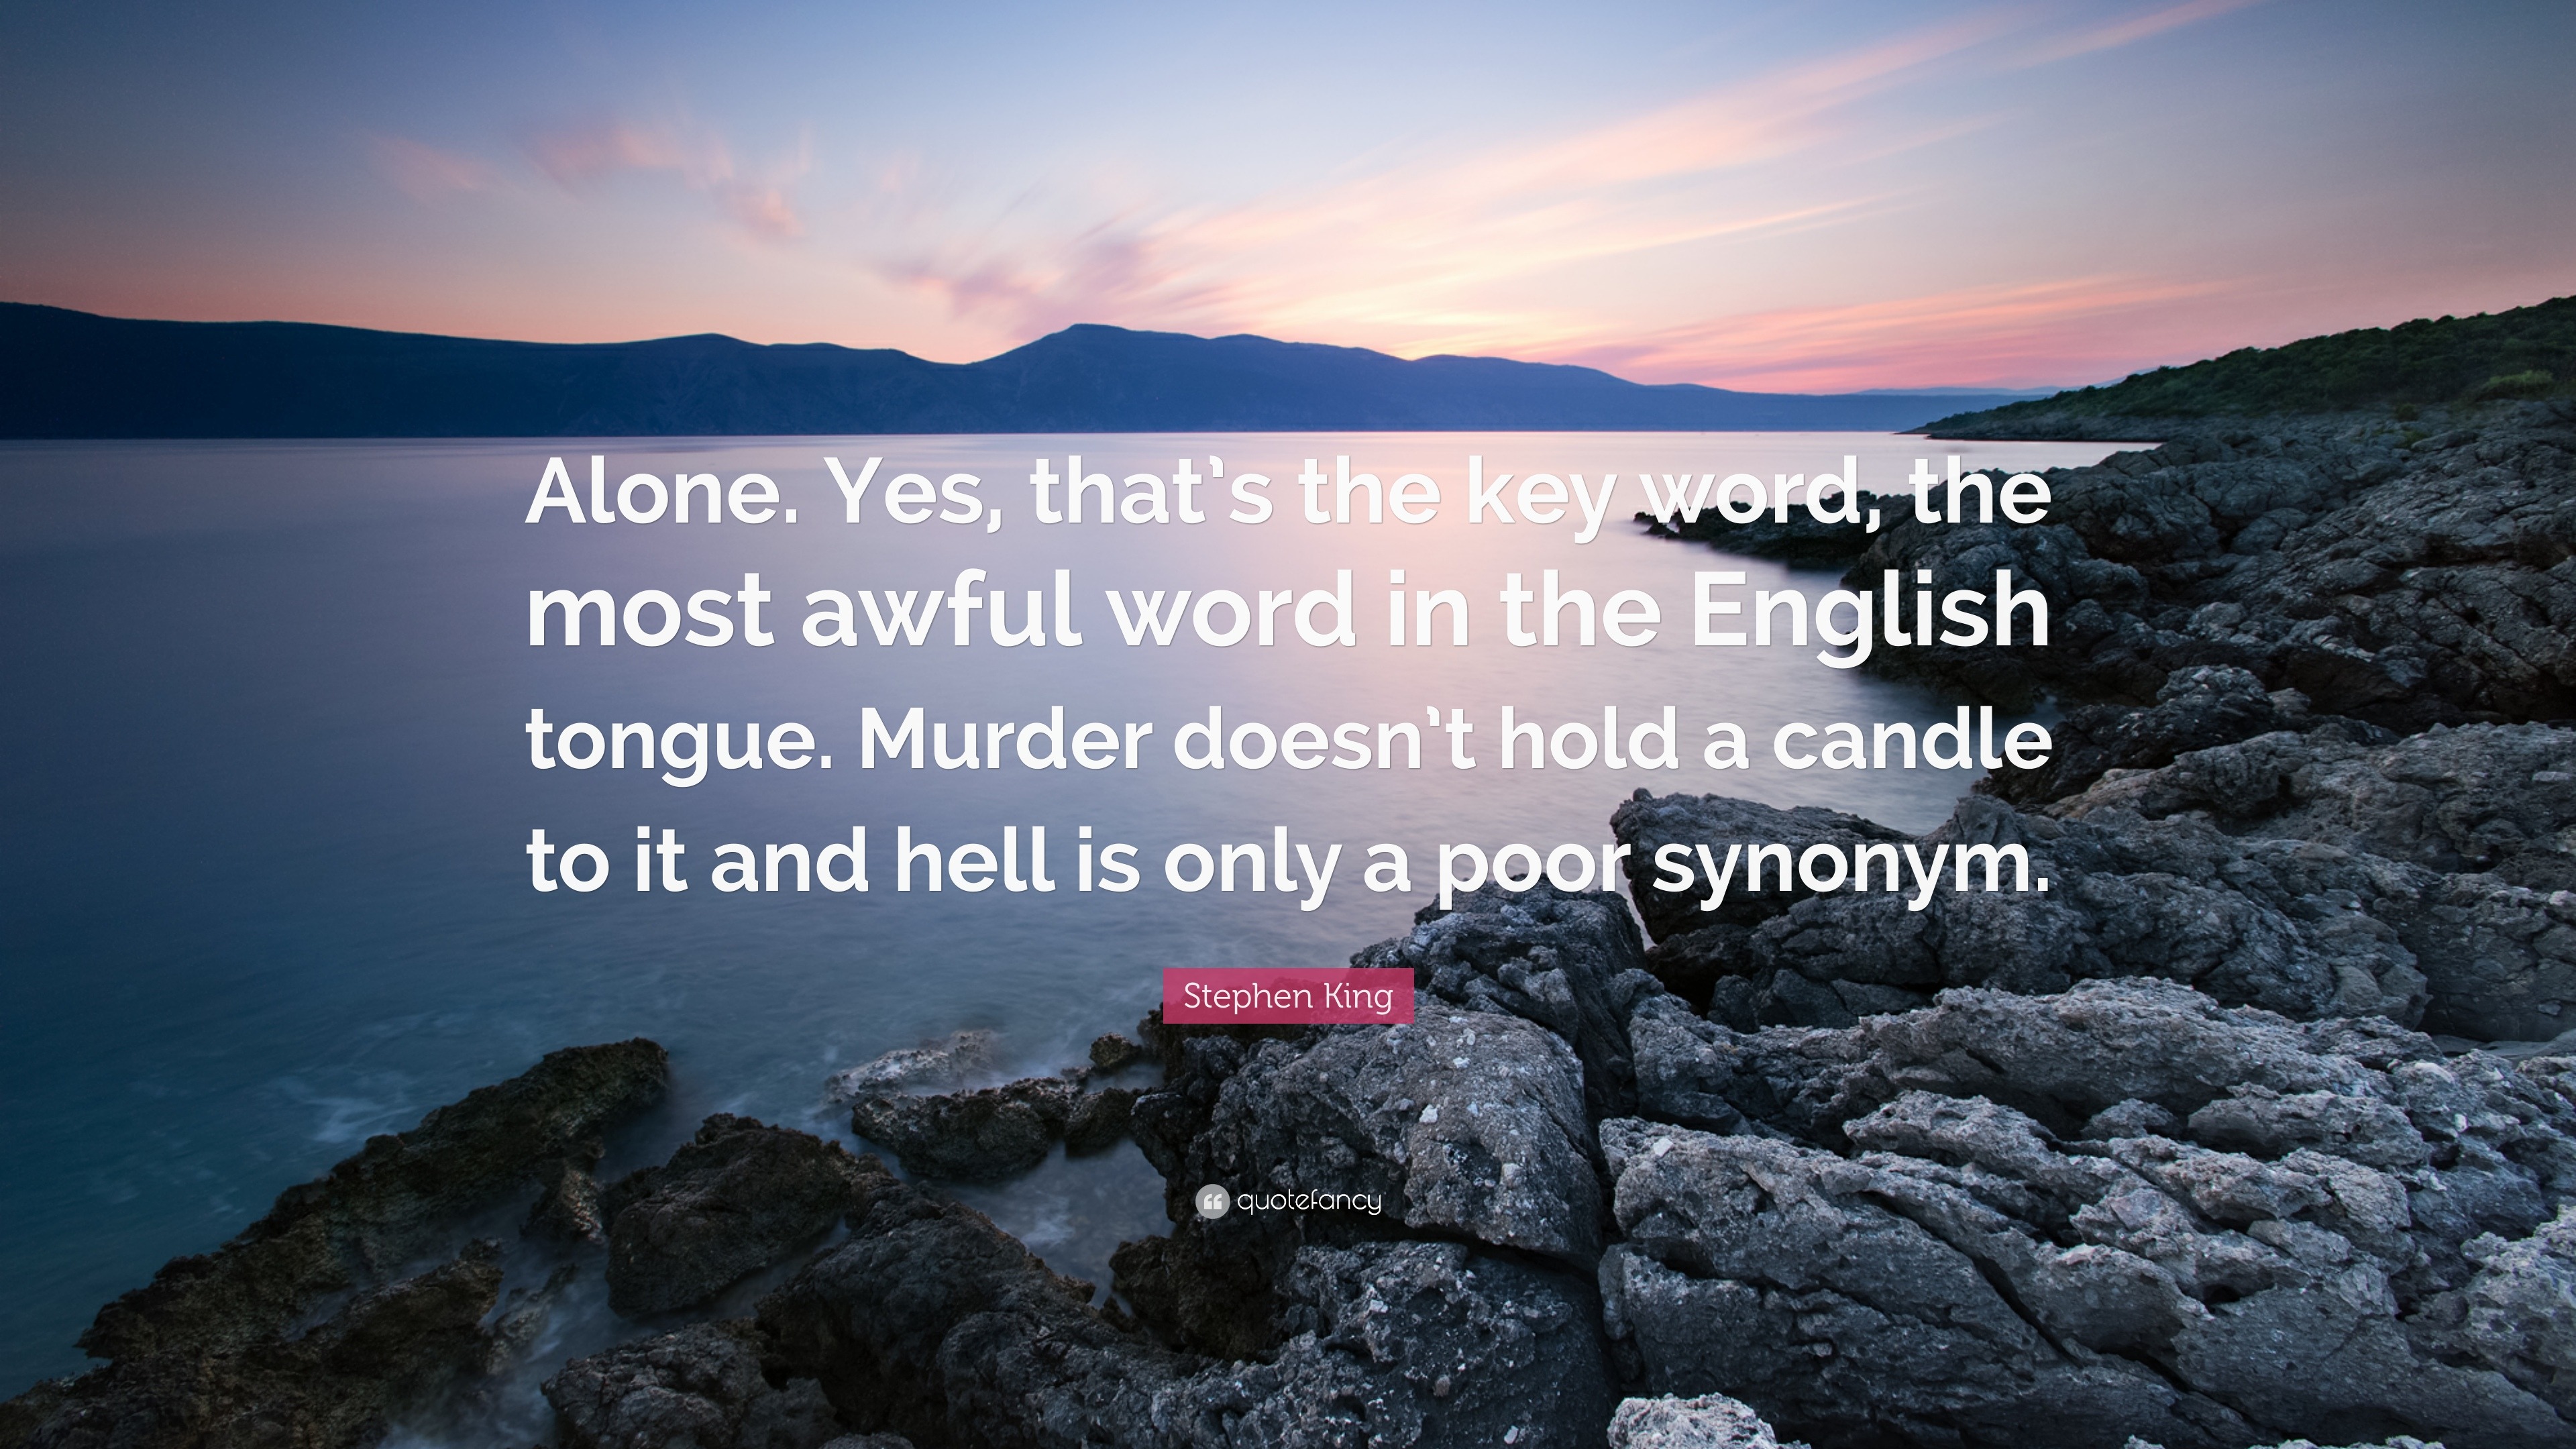 Stephen King Quote: “Alone. Yes, that's the key word, the most awful word  in the English tongue. Murder doesn't hold a candle to it and hell ”